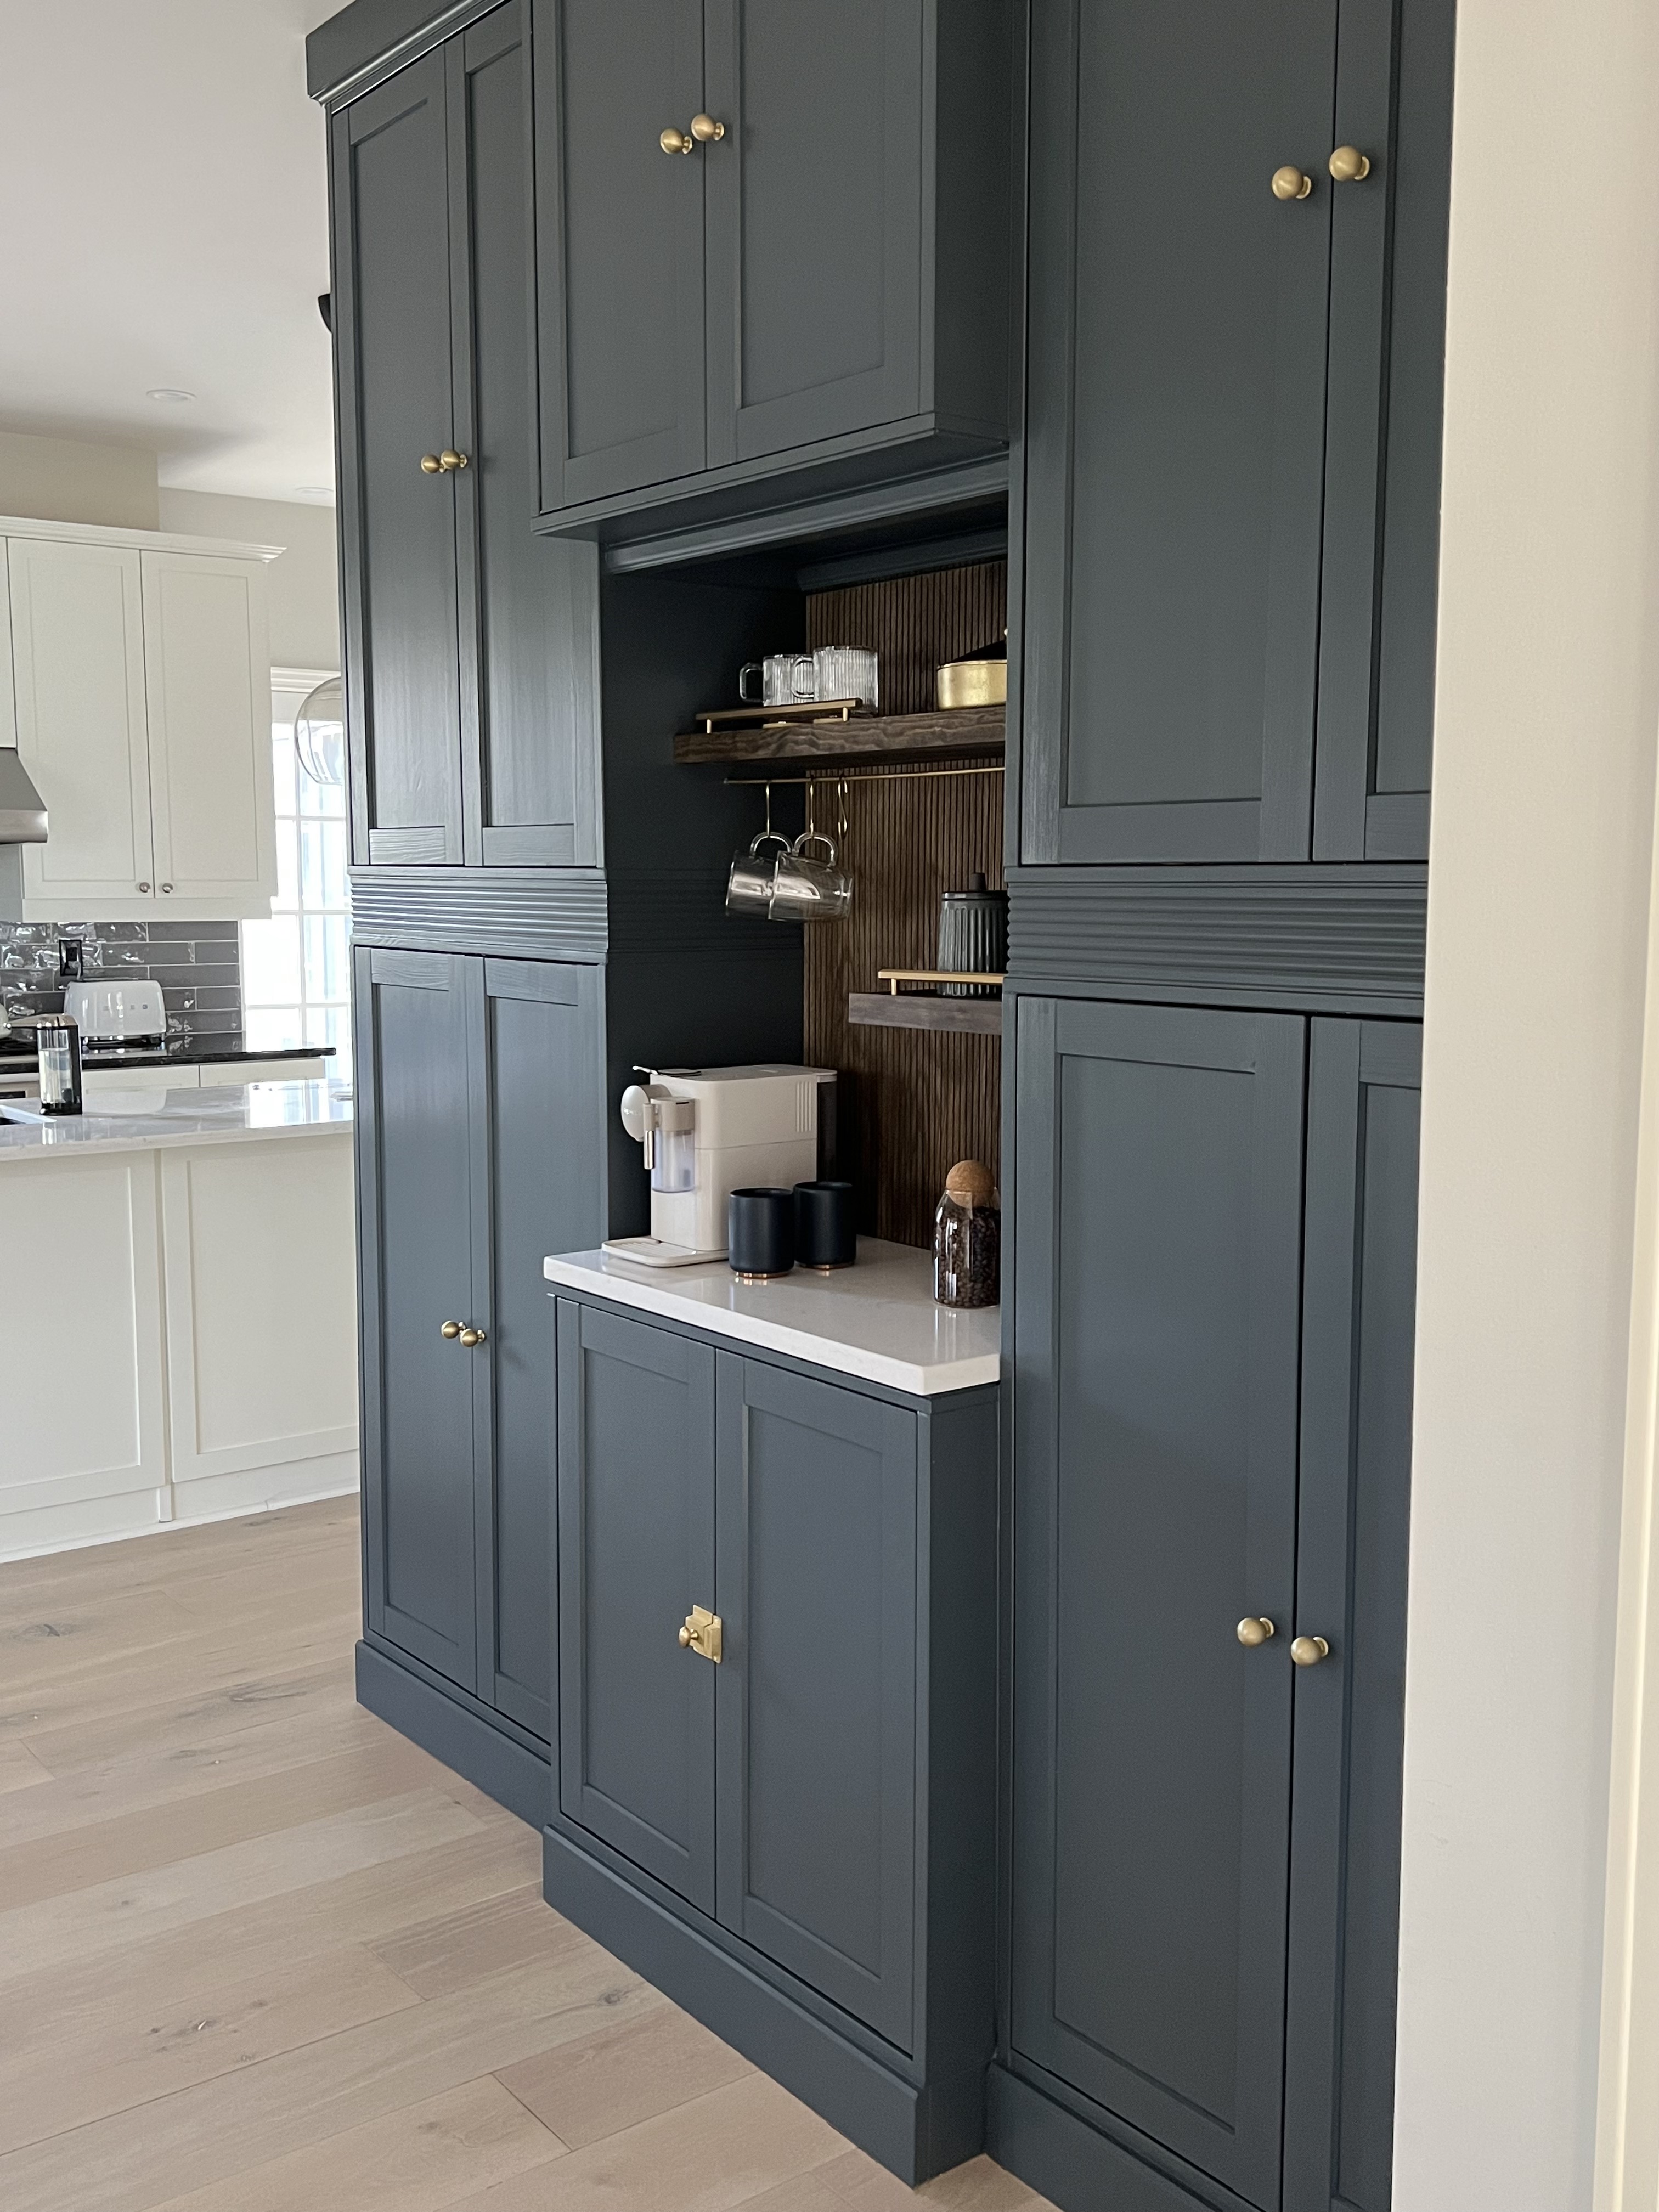 Image of completed coffee nook made with Ikea havsta cabinets.